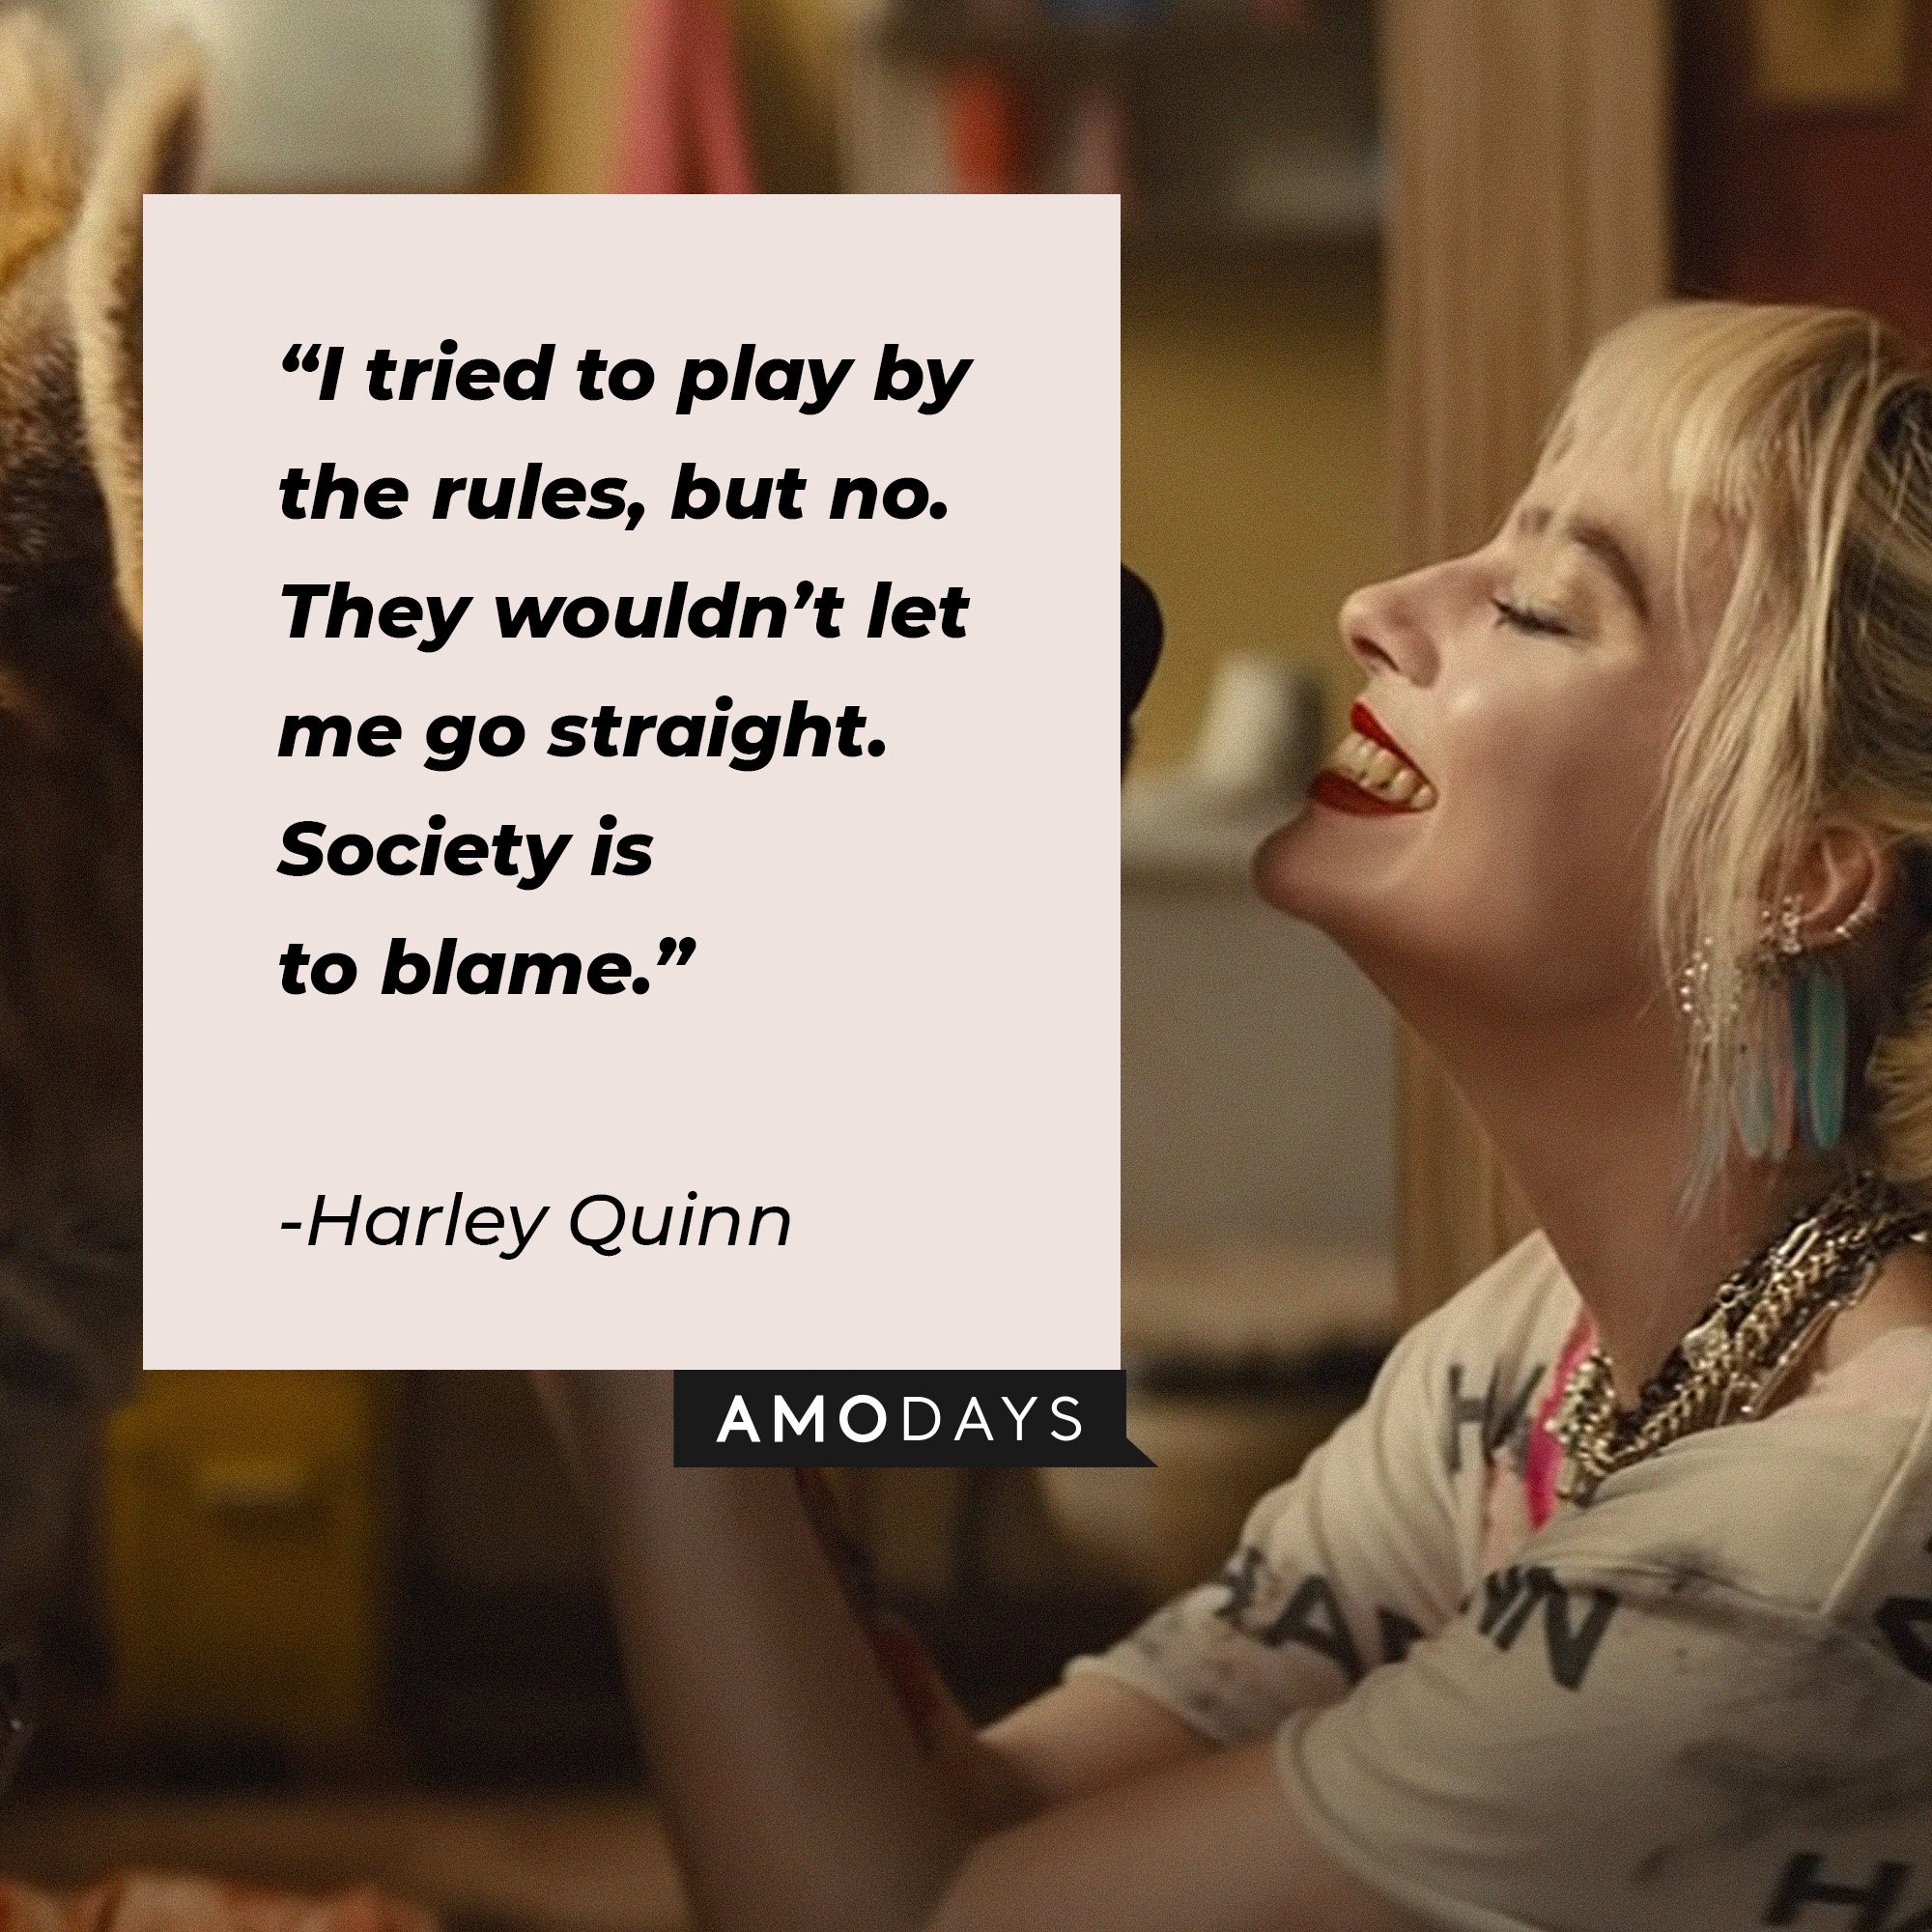 Harley Quinn’s quote: “I tried to play by the rules, but no. They wouldn’t let me go straight. Society is to blame.” | Source: Image: AmoDays